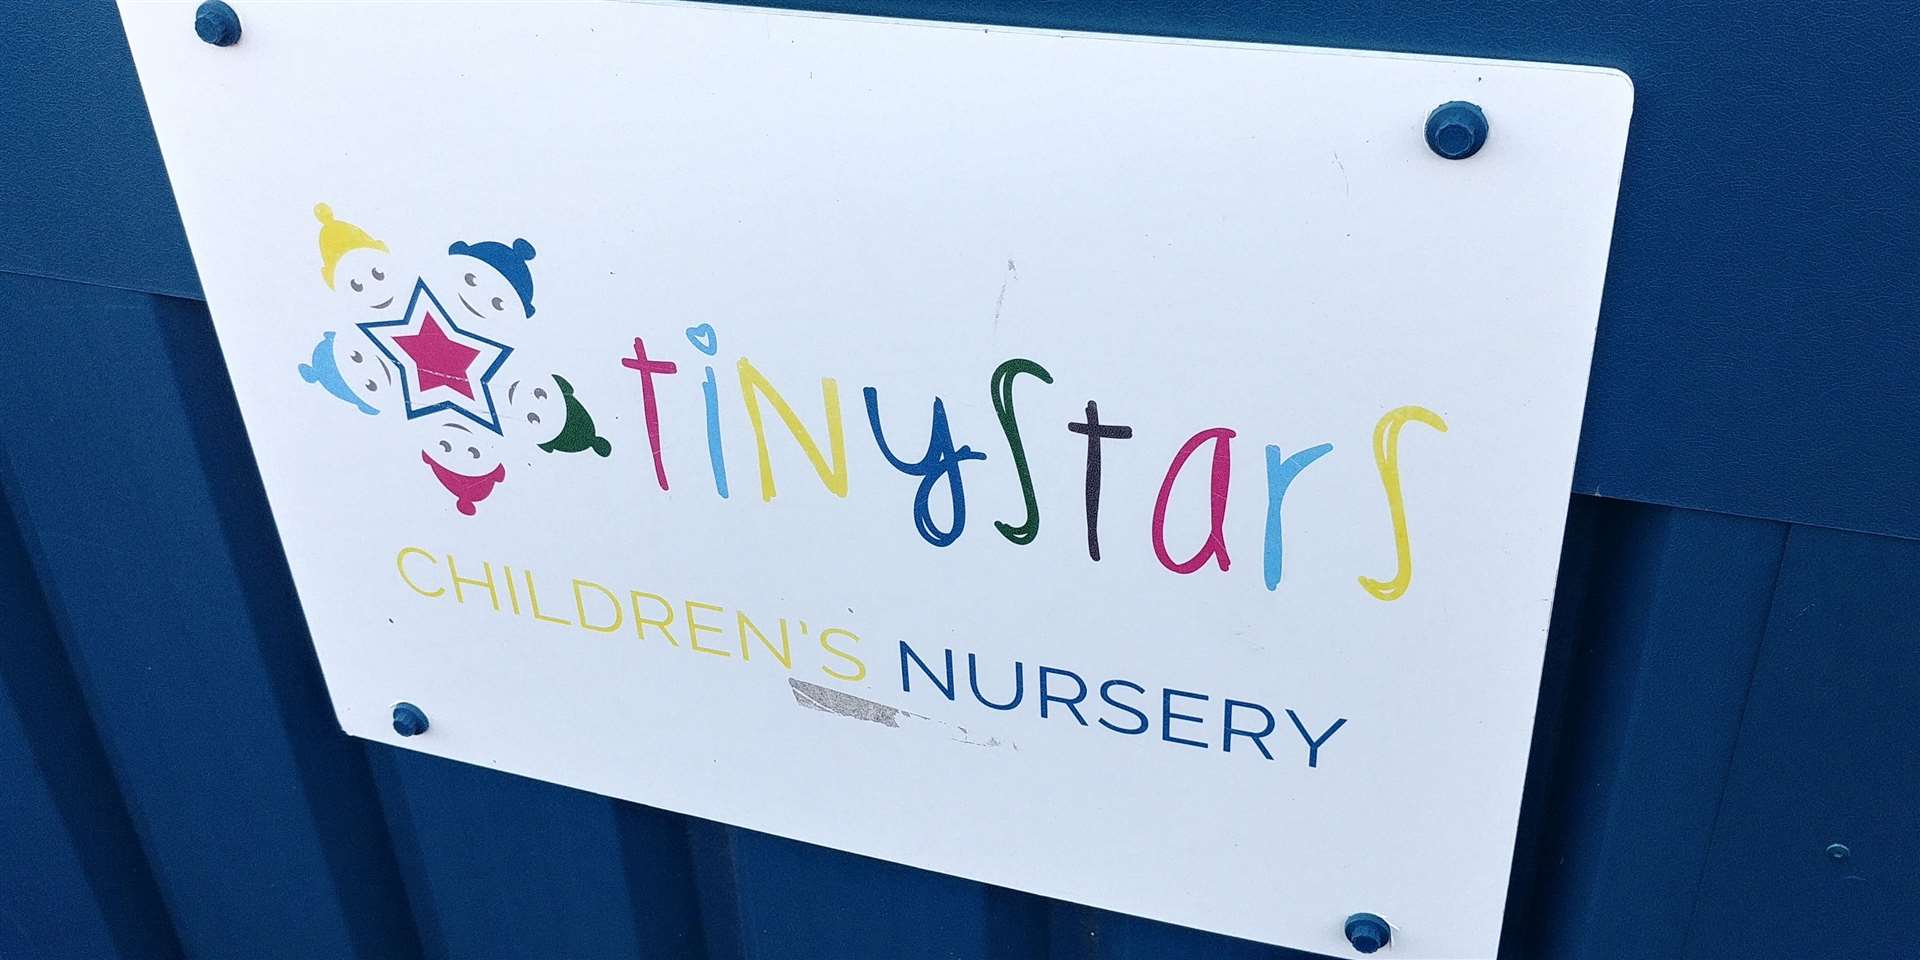 It is not known when, or if, Tiny Stars nursery in Canterbury will reopen